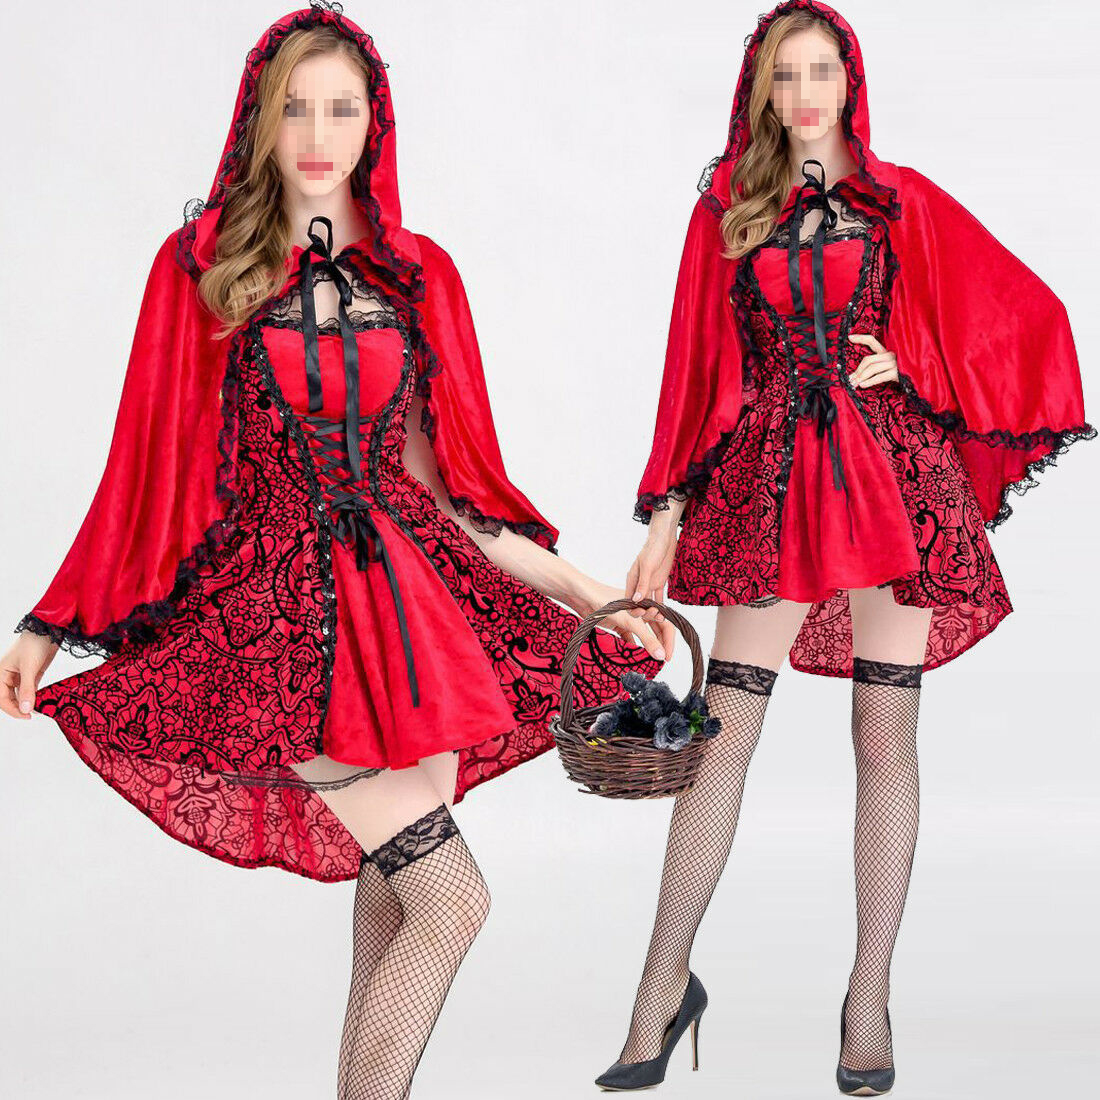 Sexy Women Fancy Costume Cosplay Crazy Halloween Fashion Red Cap Outfit Princess Dress